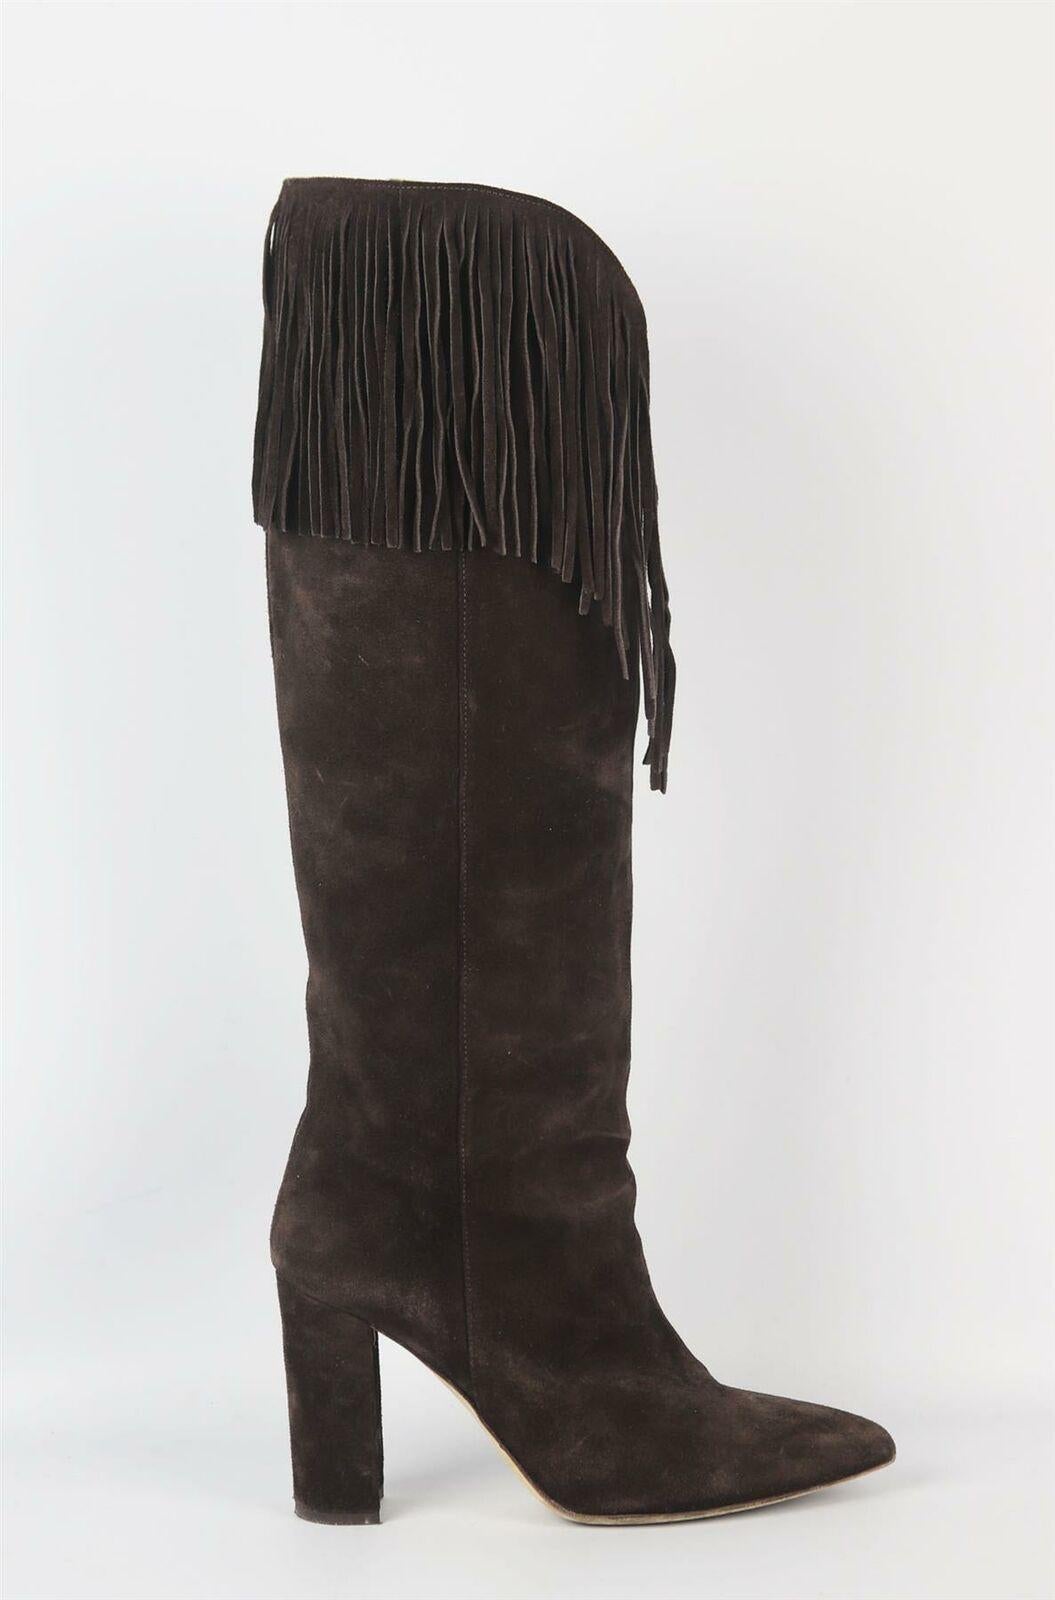 Paris Texas's boots are cut from the label's exceptionally supple suede, designed to hit just under the knee, this classic brown pair has fringing detail along the edges and a slight v dip to elongate your legs.
Heel measures approximately 100mm/ 4